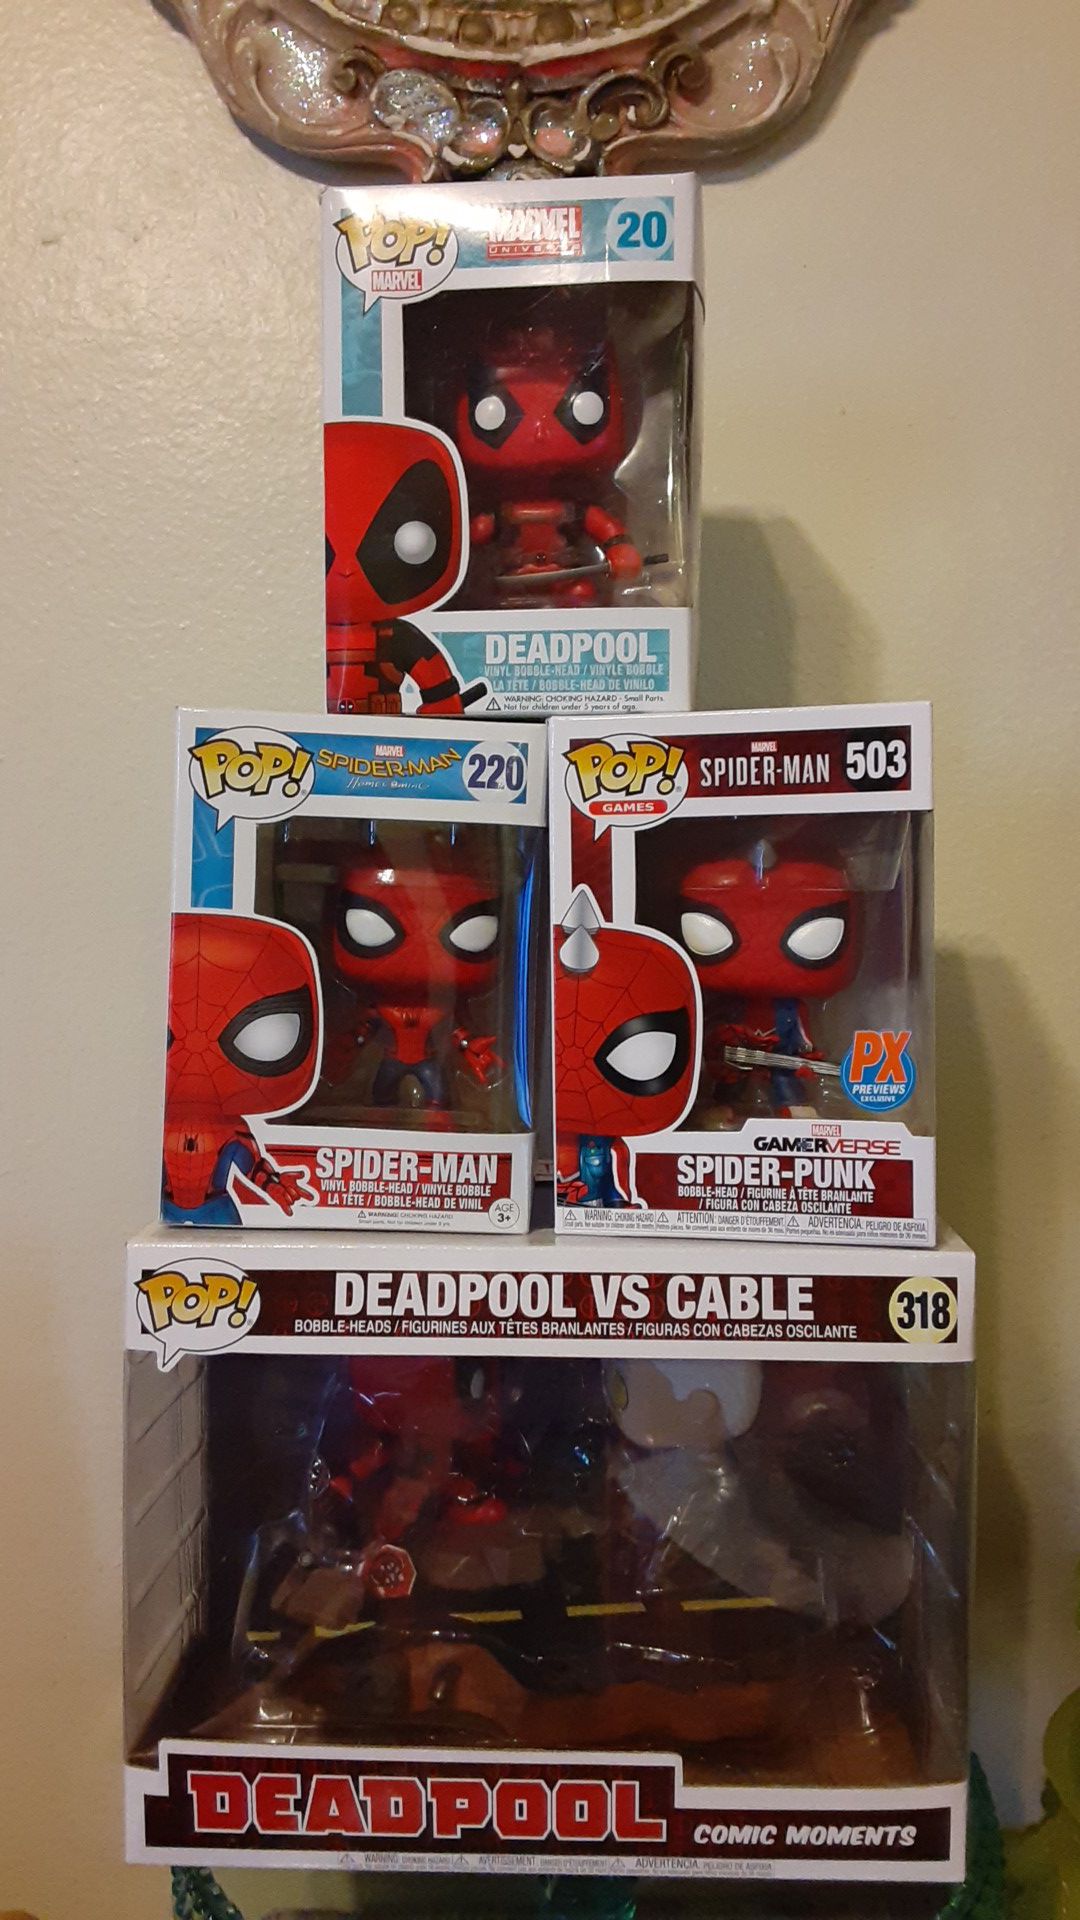 Spiderman..and big box of Deadpool vs cable.